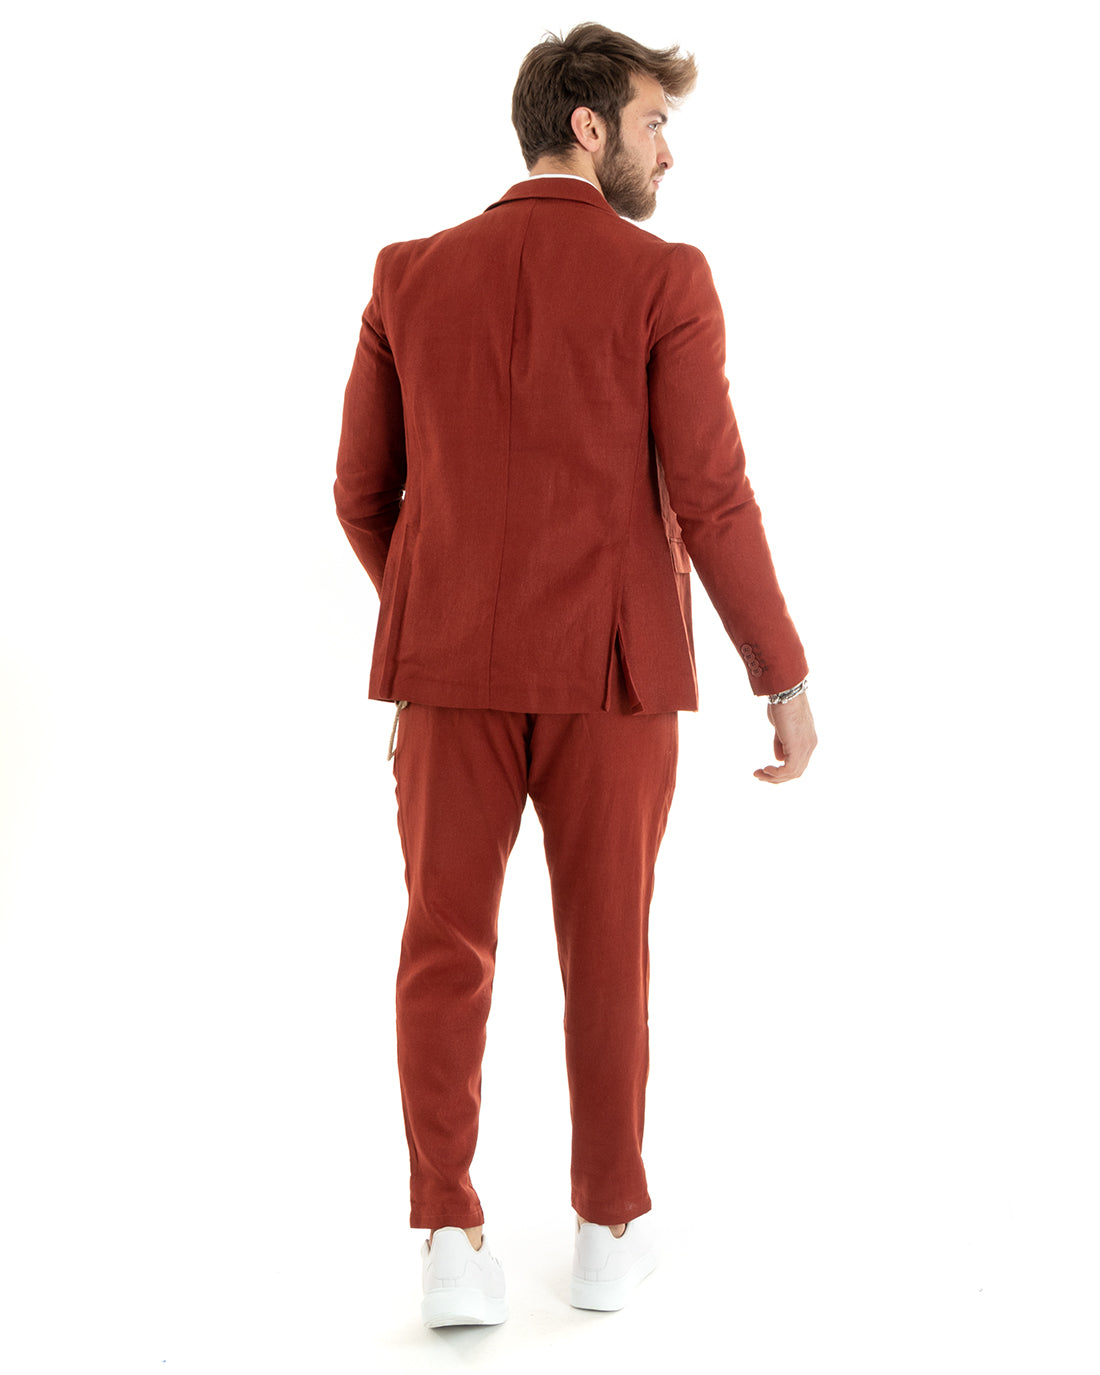 Double-breasted men's suit, tailored linen suit, jacket, trousers, solid color, brick GIOSAL-OU2335A